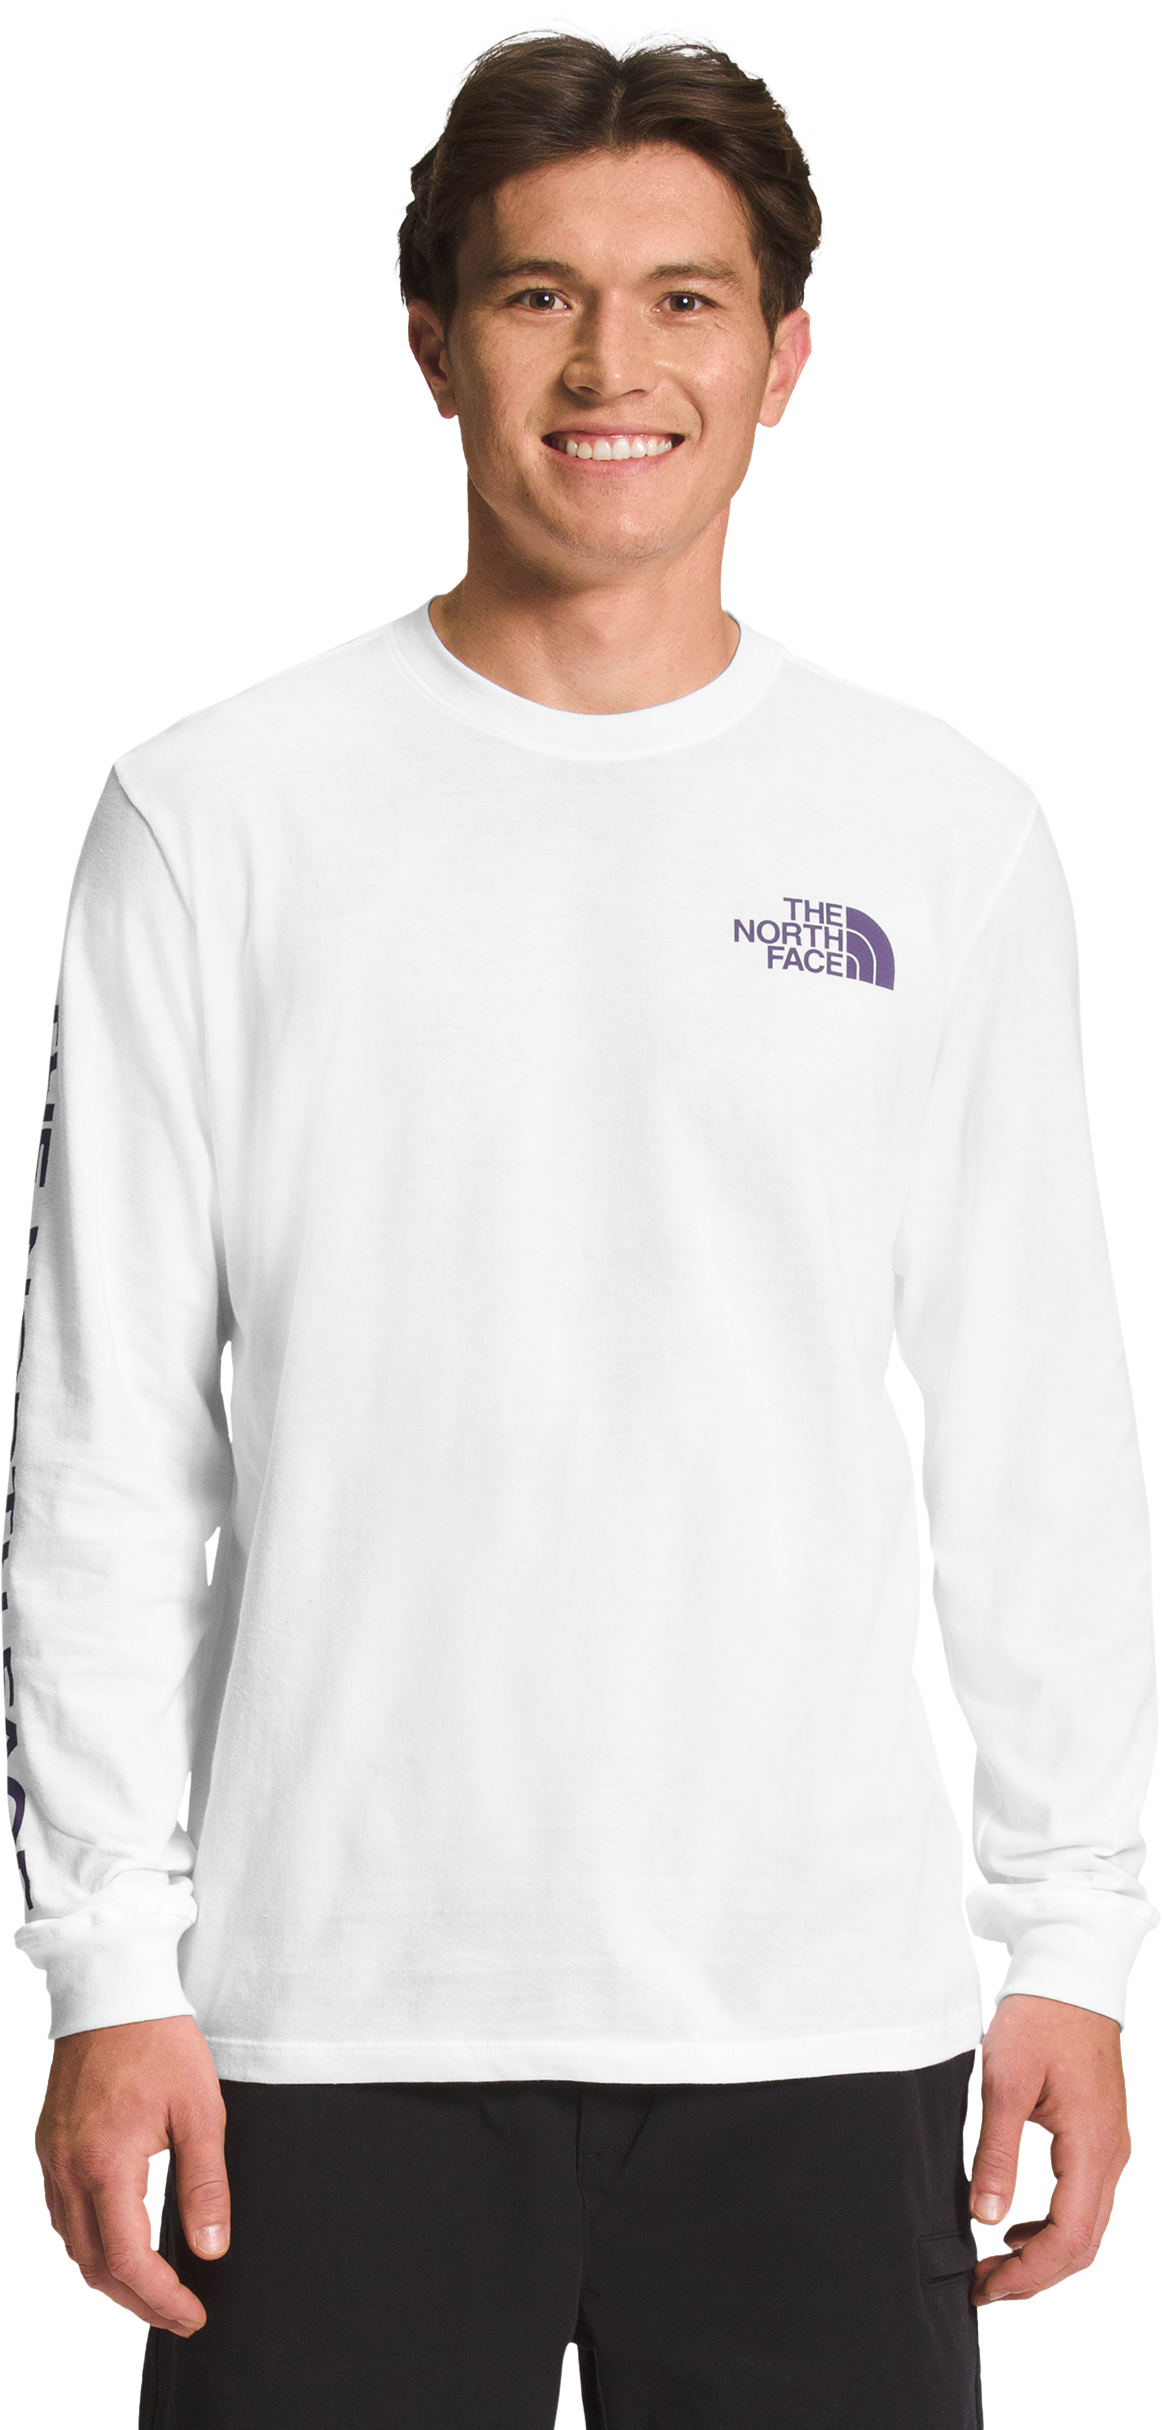 The North Face Hit Graphic Long-Sleeve T-Shirt for Men - TNF White/Lunar Slate - M